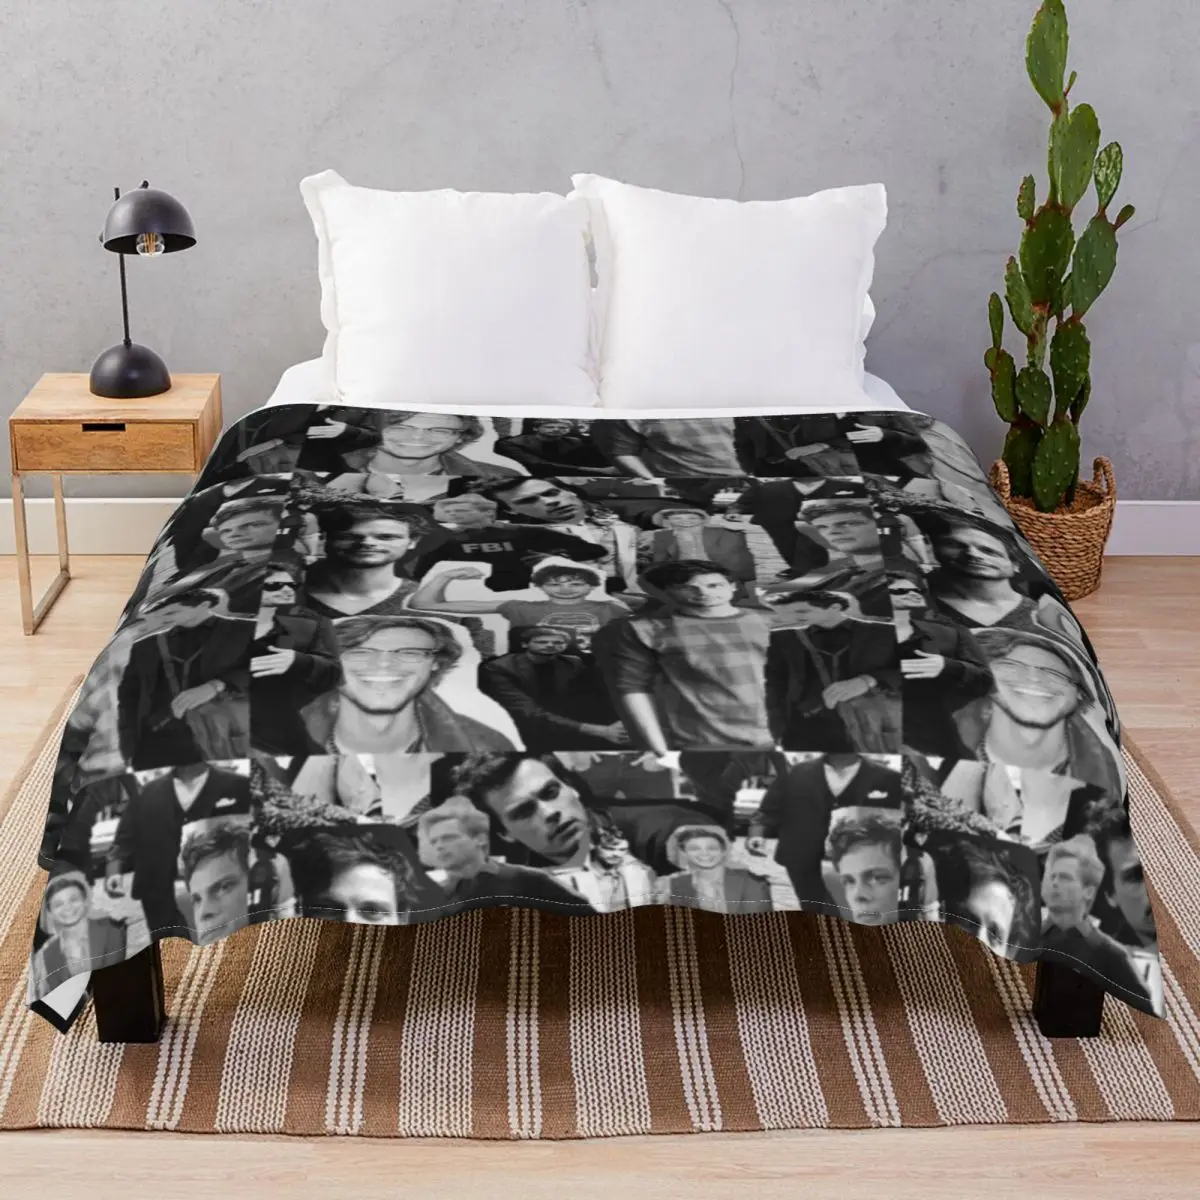 Matthew Gray Gubler Collage Blankets Flannel Plush Print Breathable Throw Blanket for Bed Sofa Camp Office